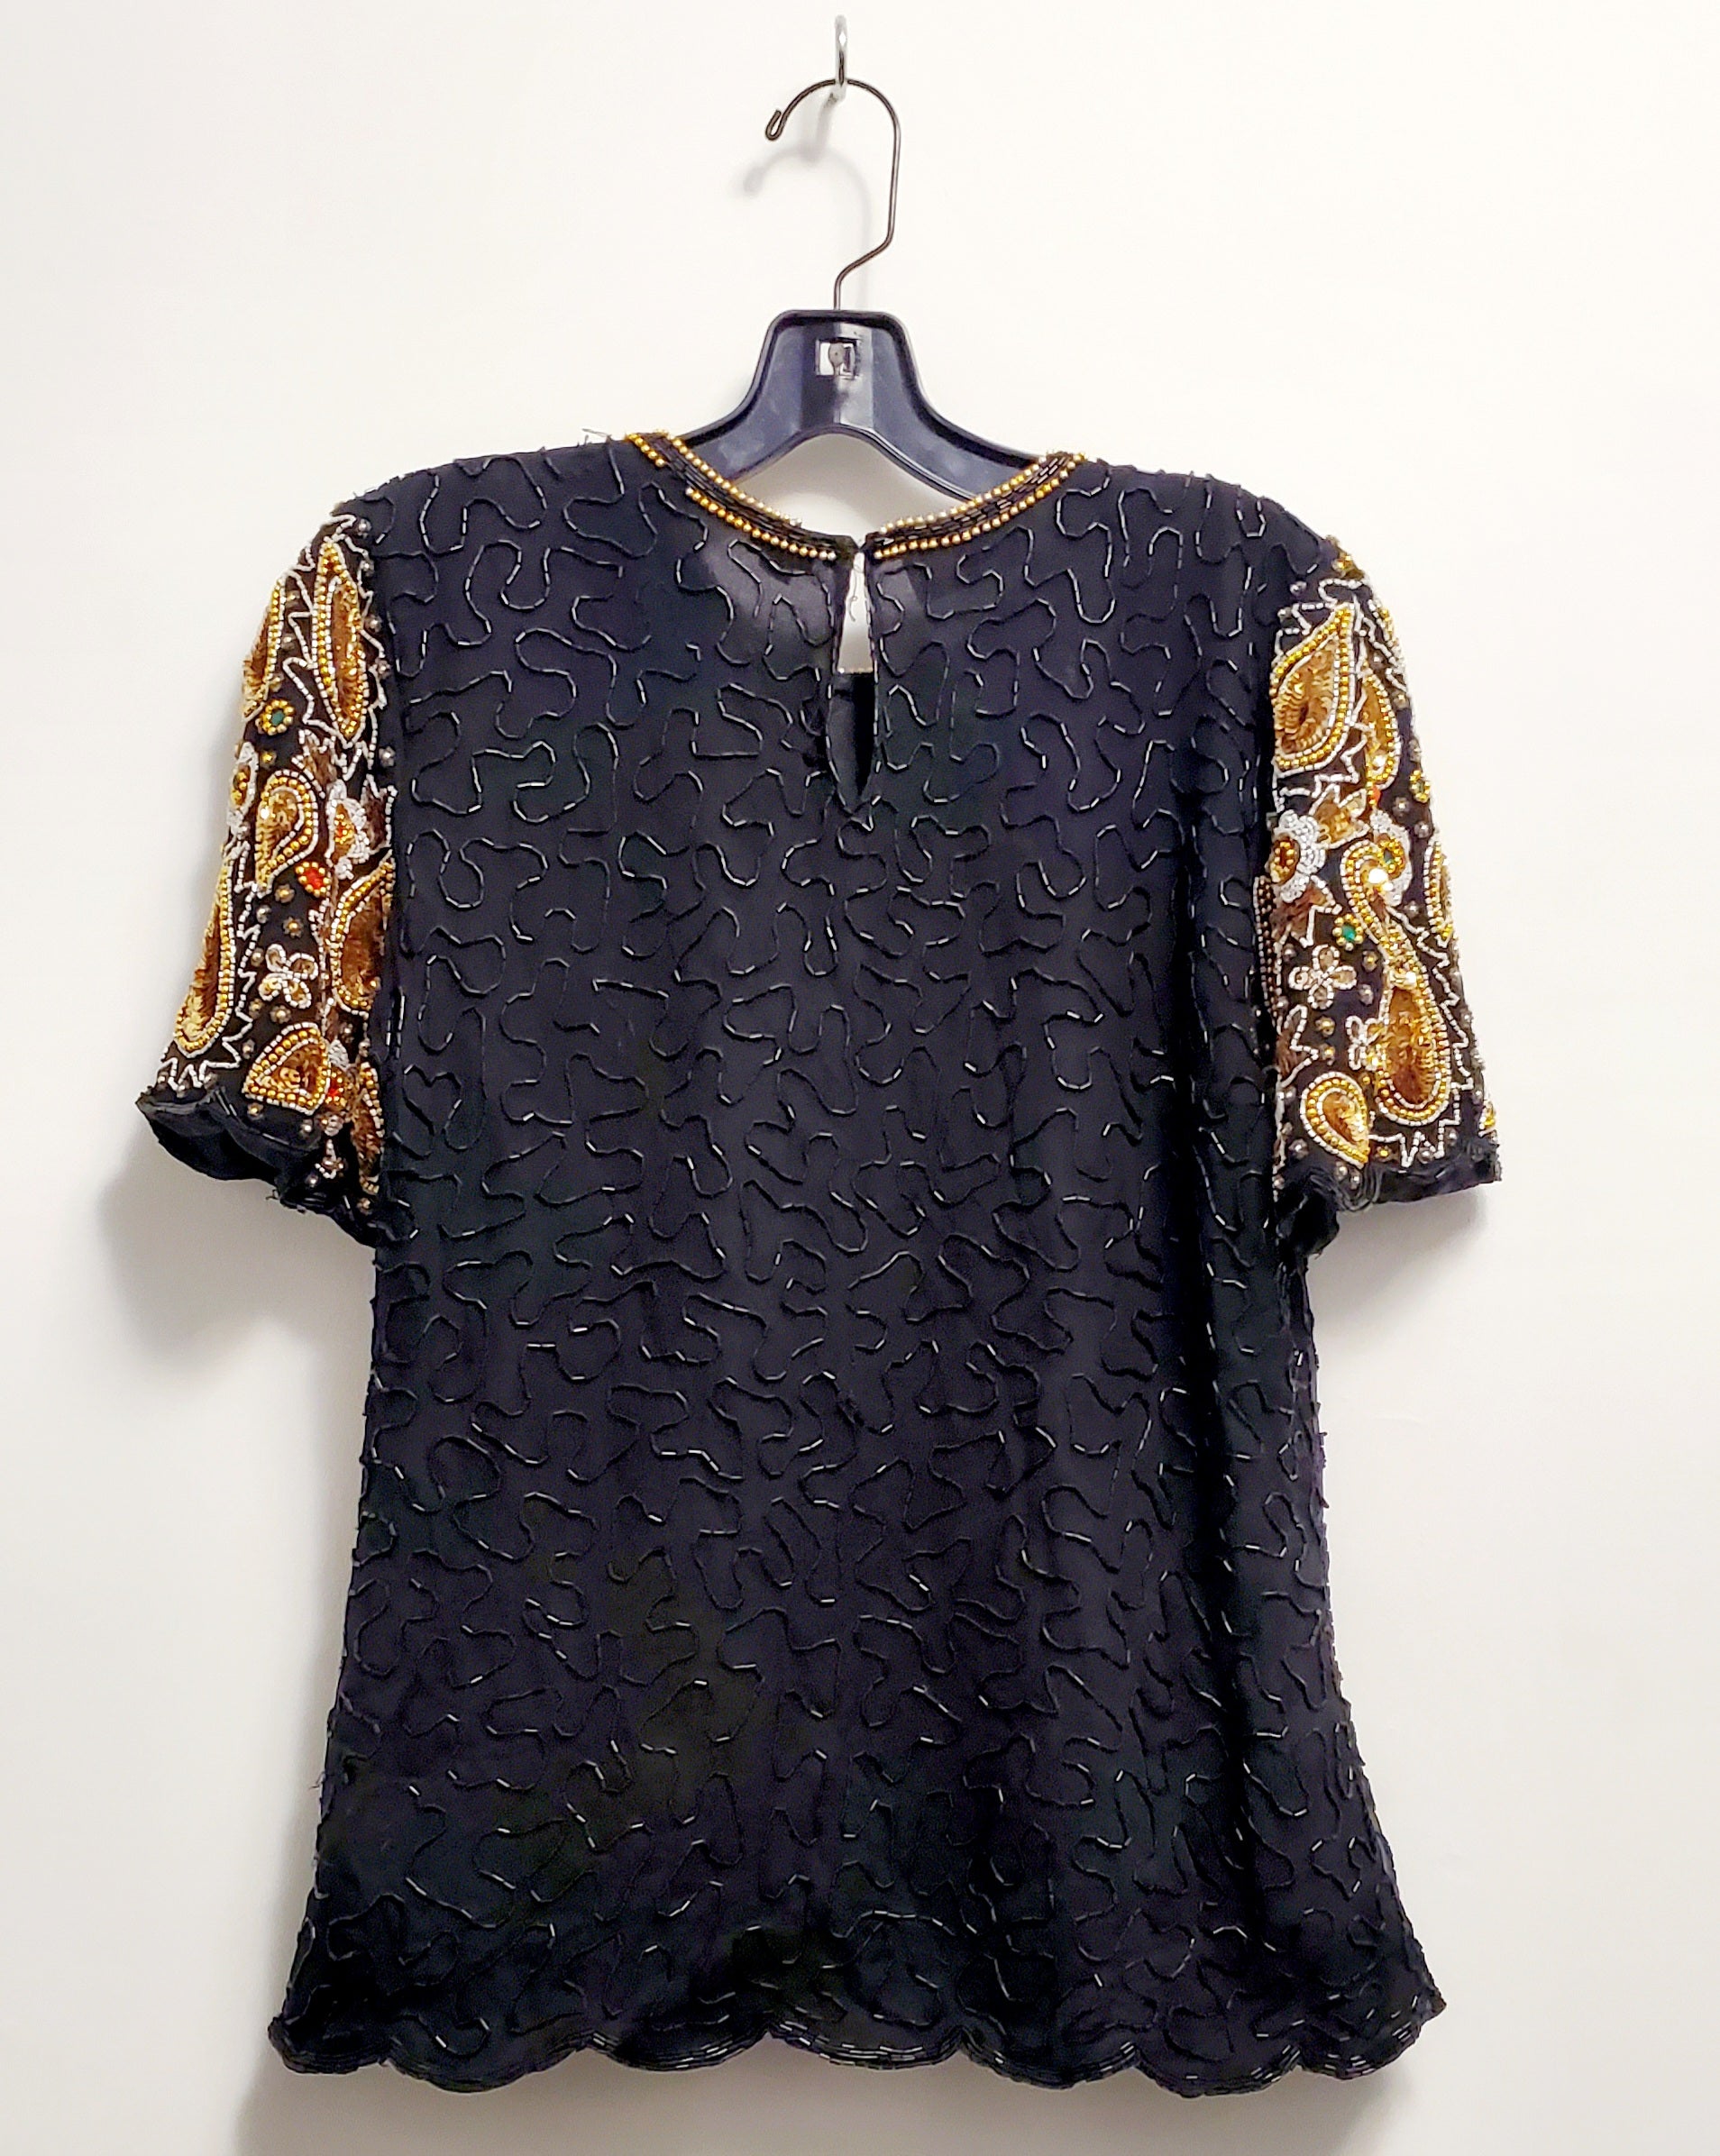 BEJEWELLED-80s Black and gold paisley rhinestone, bead and sequin top